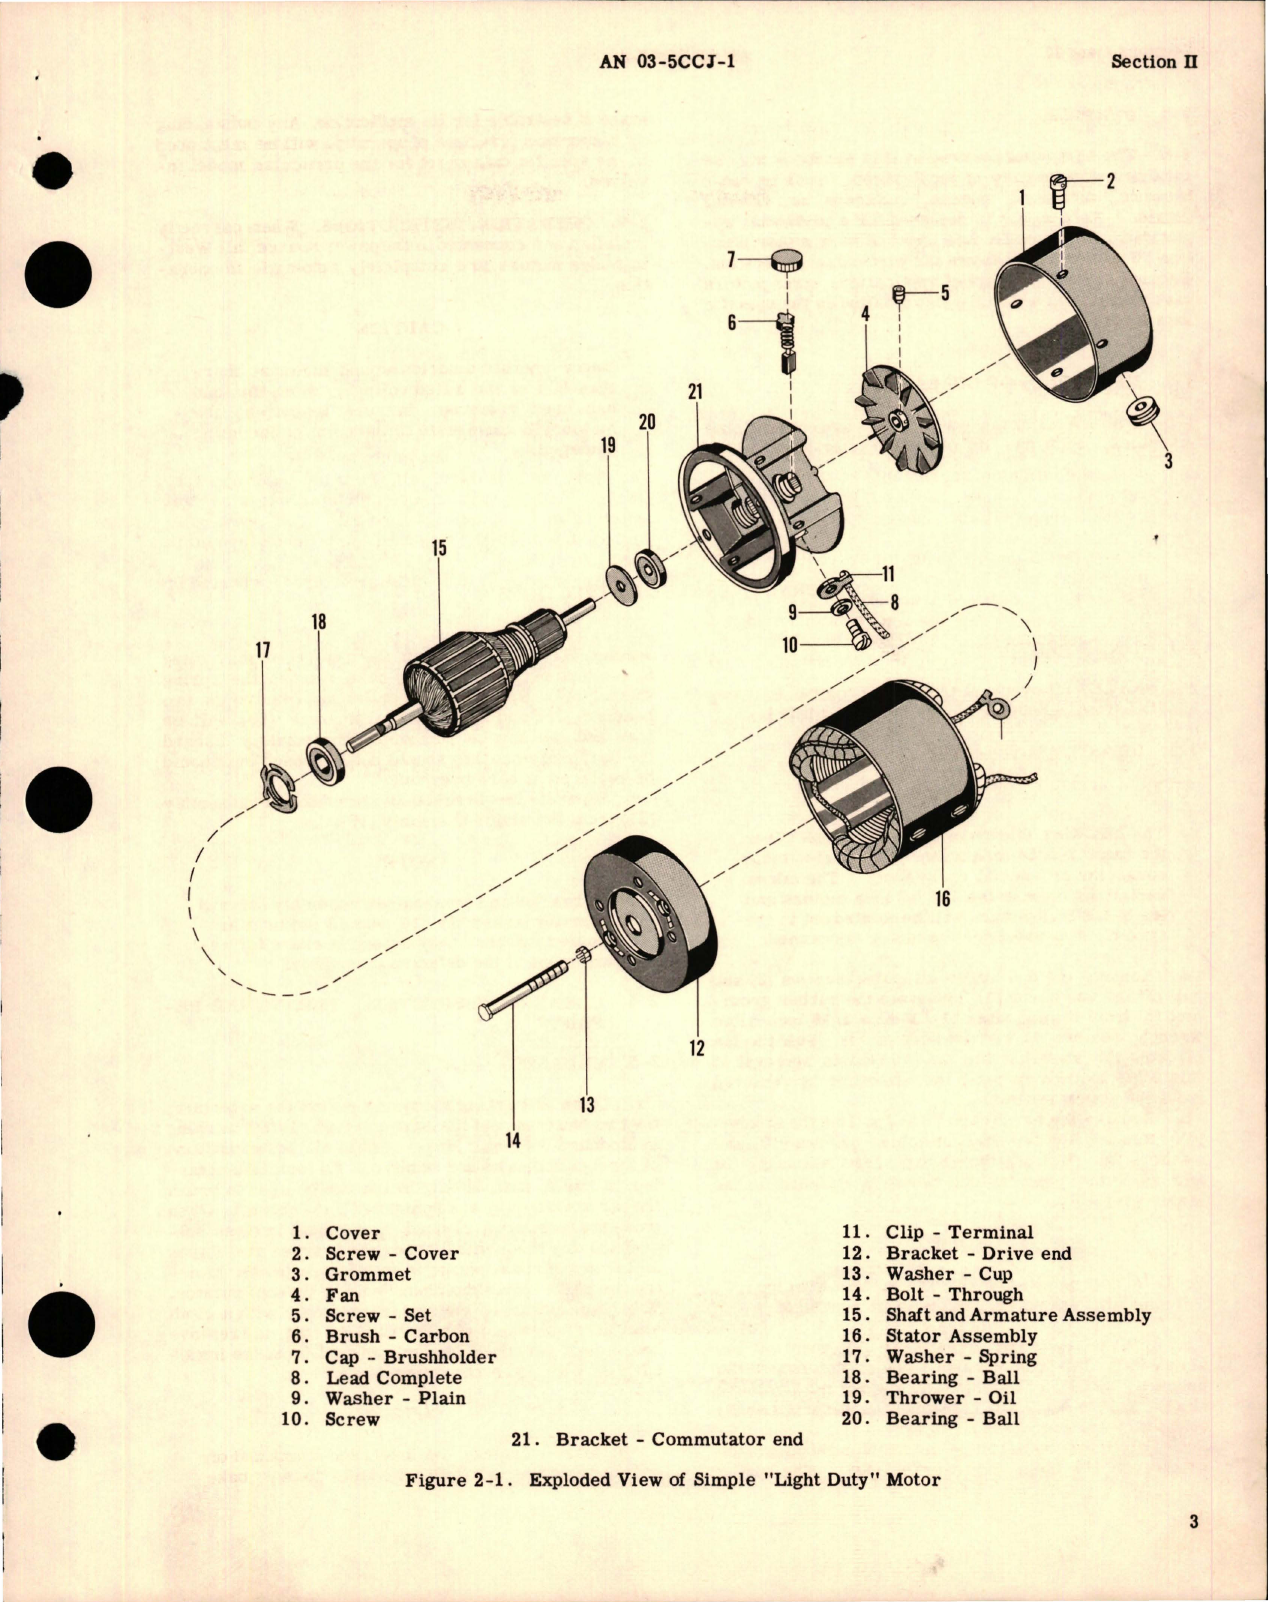 Sample page 5 from AirCorps Library document: Overhaul Instructions for D-C Motors - Parts A19A6103, A19A6162, A24A9238, A28A8535, 1171186 